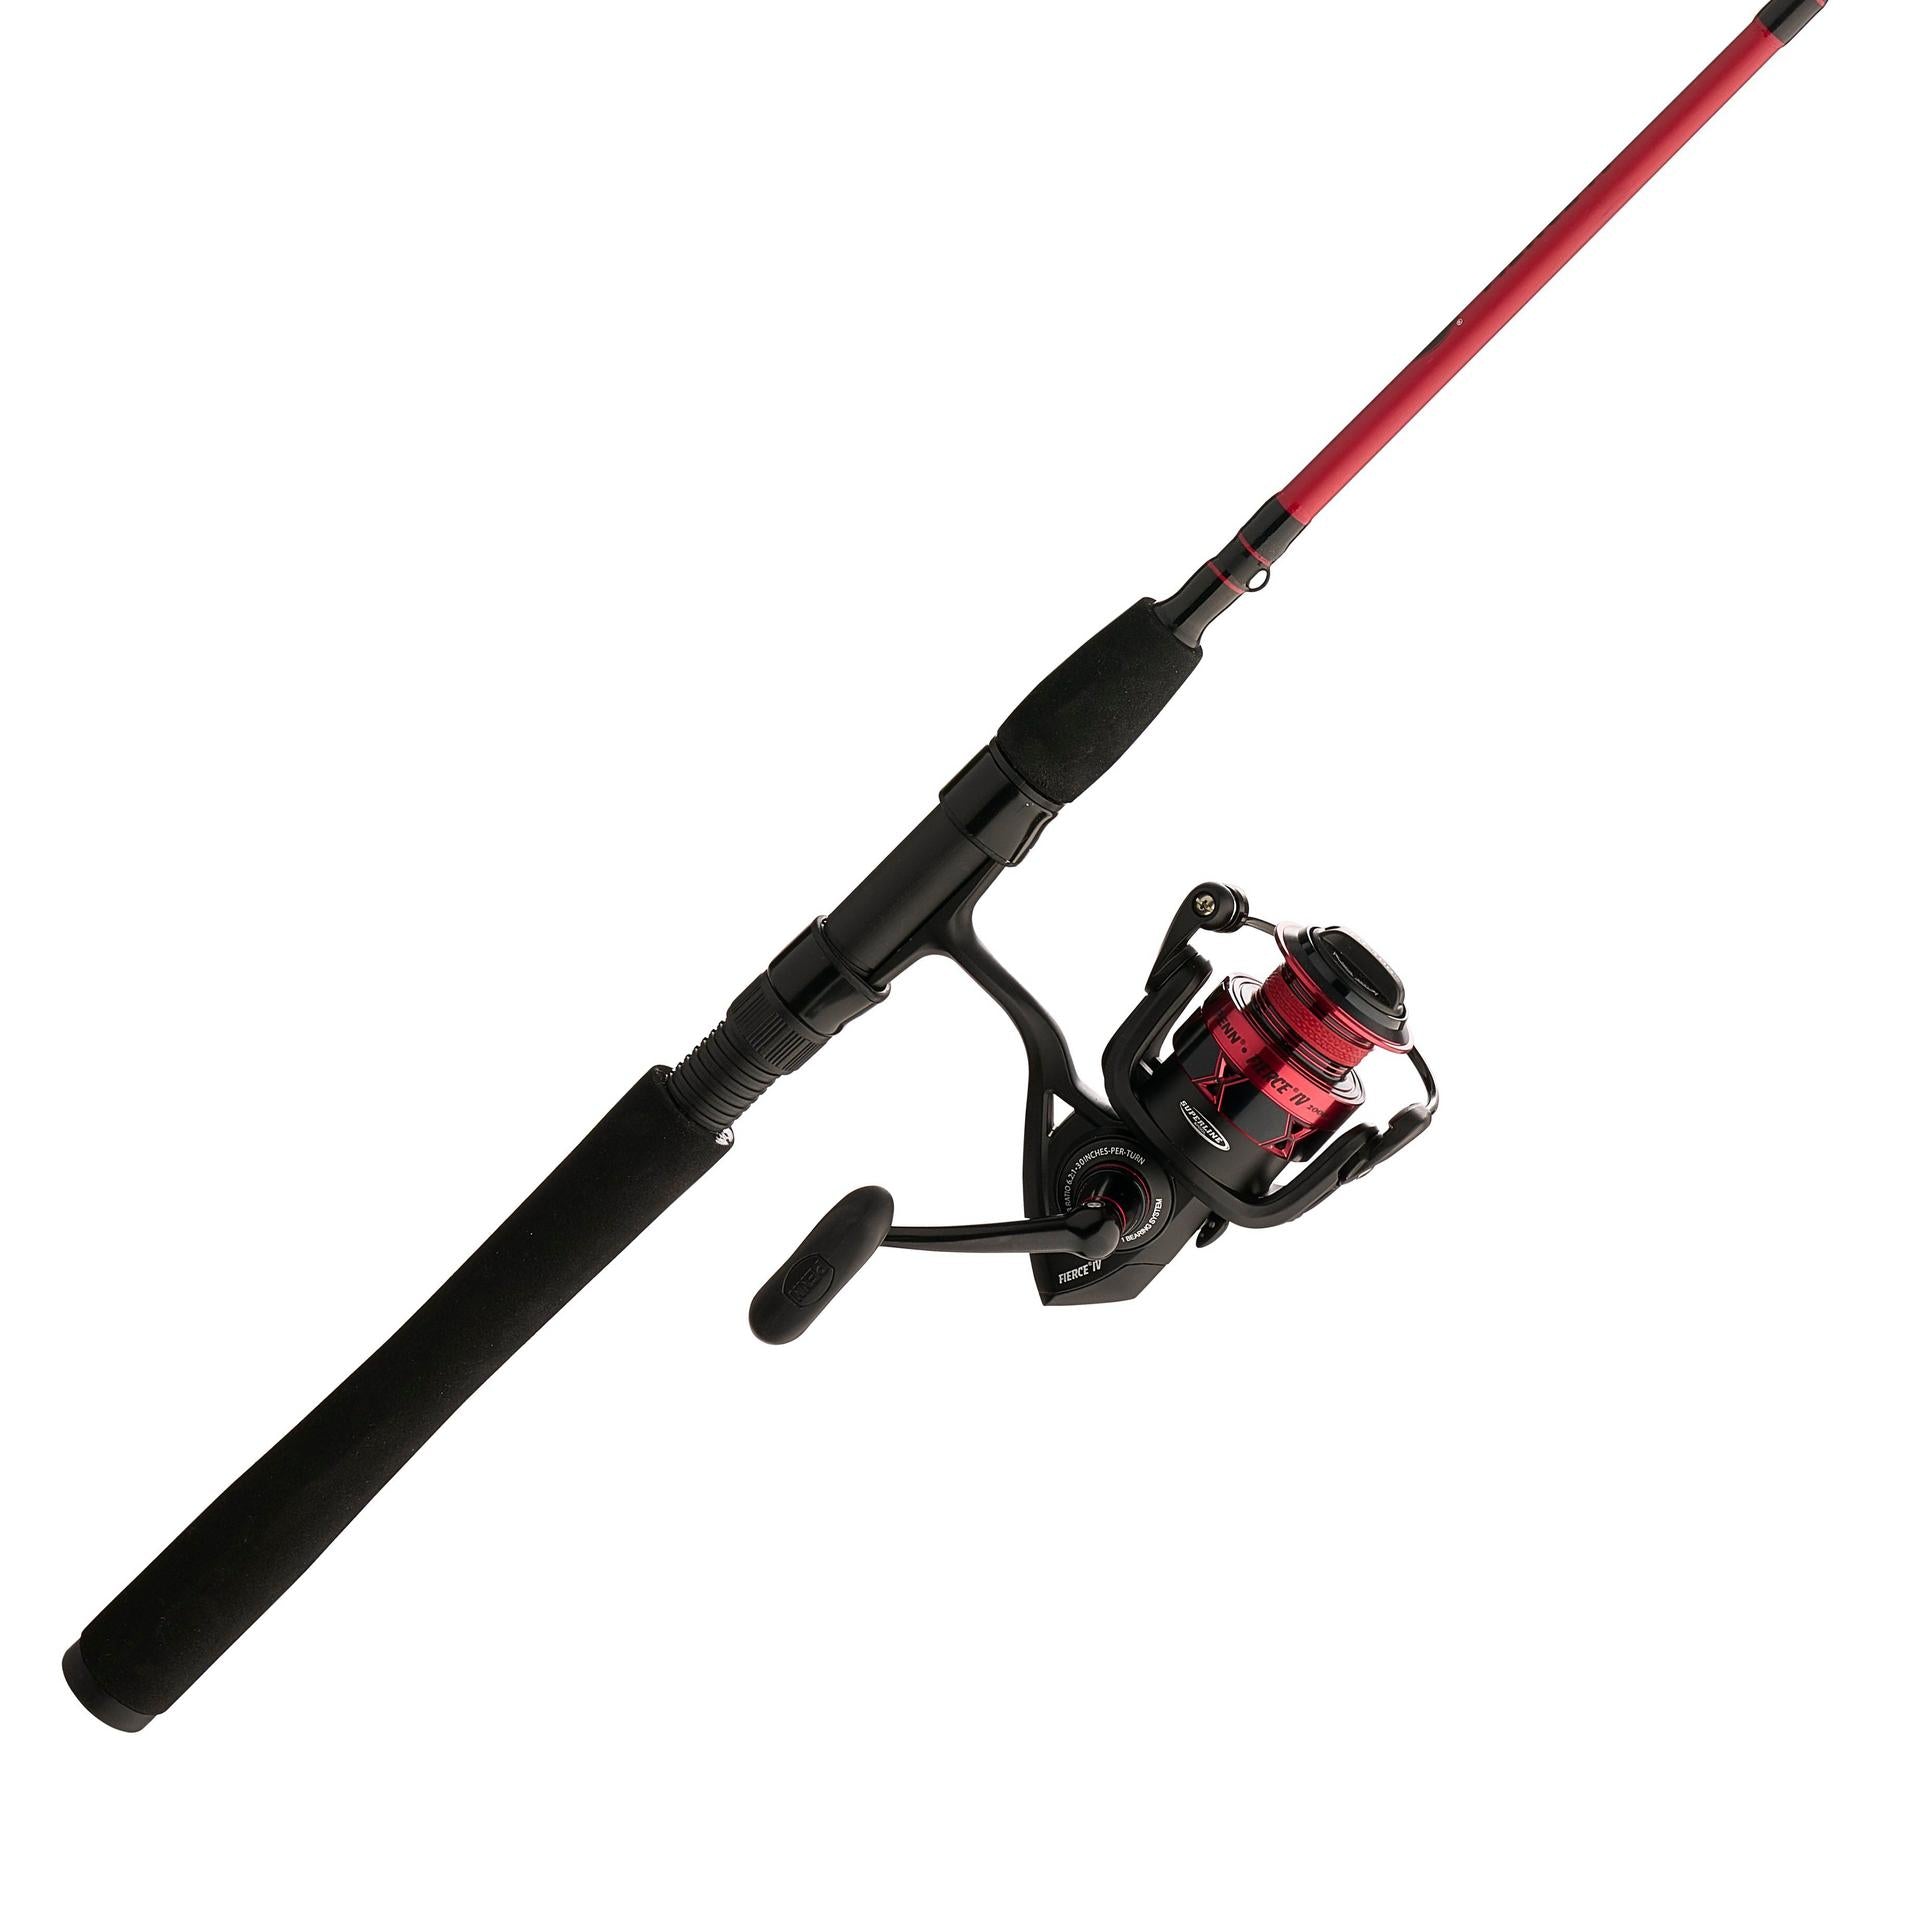 Medium Heavy Spinning Rod 8 ft 6 in Item Fishing Rods & Poles for sale